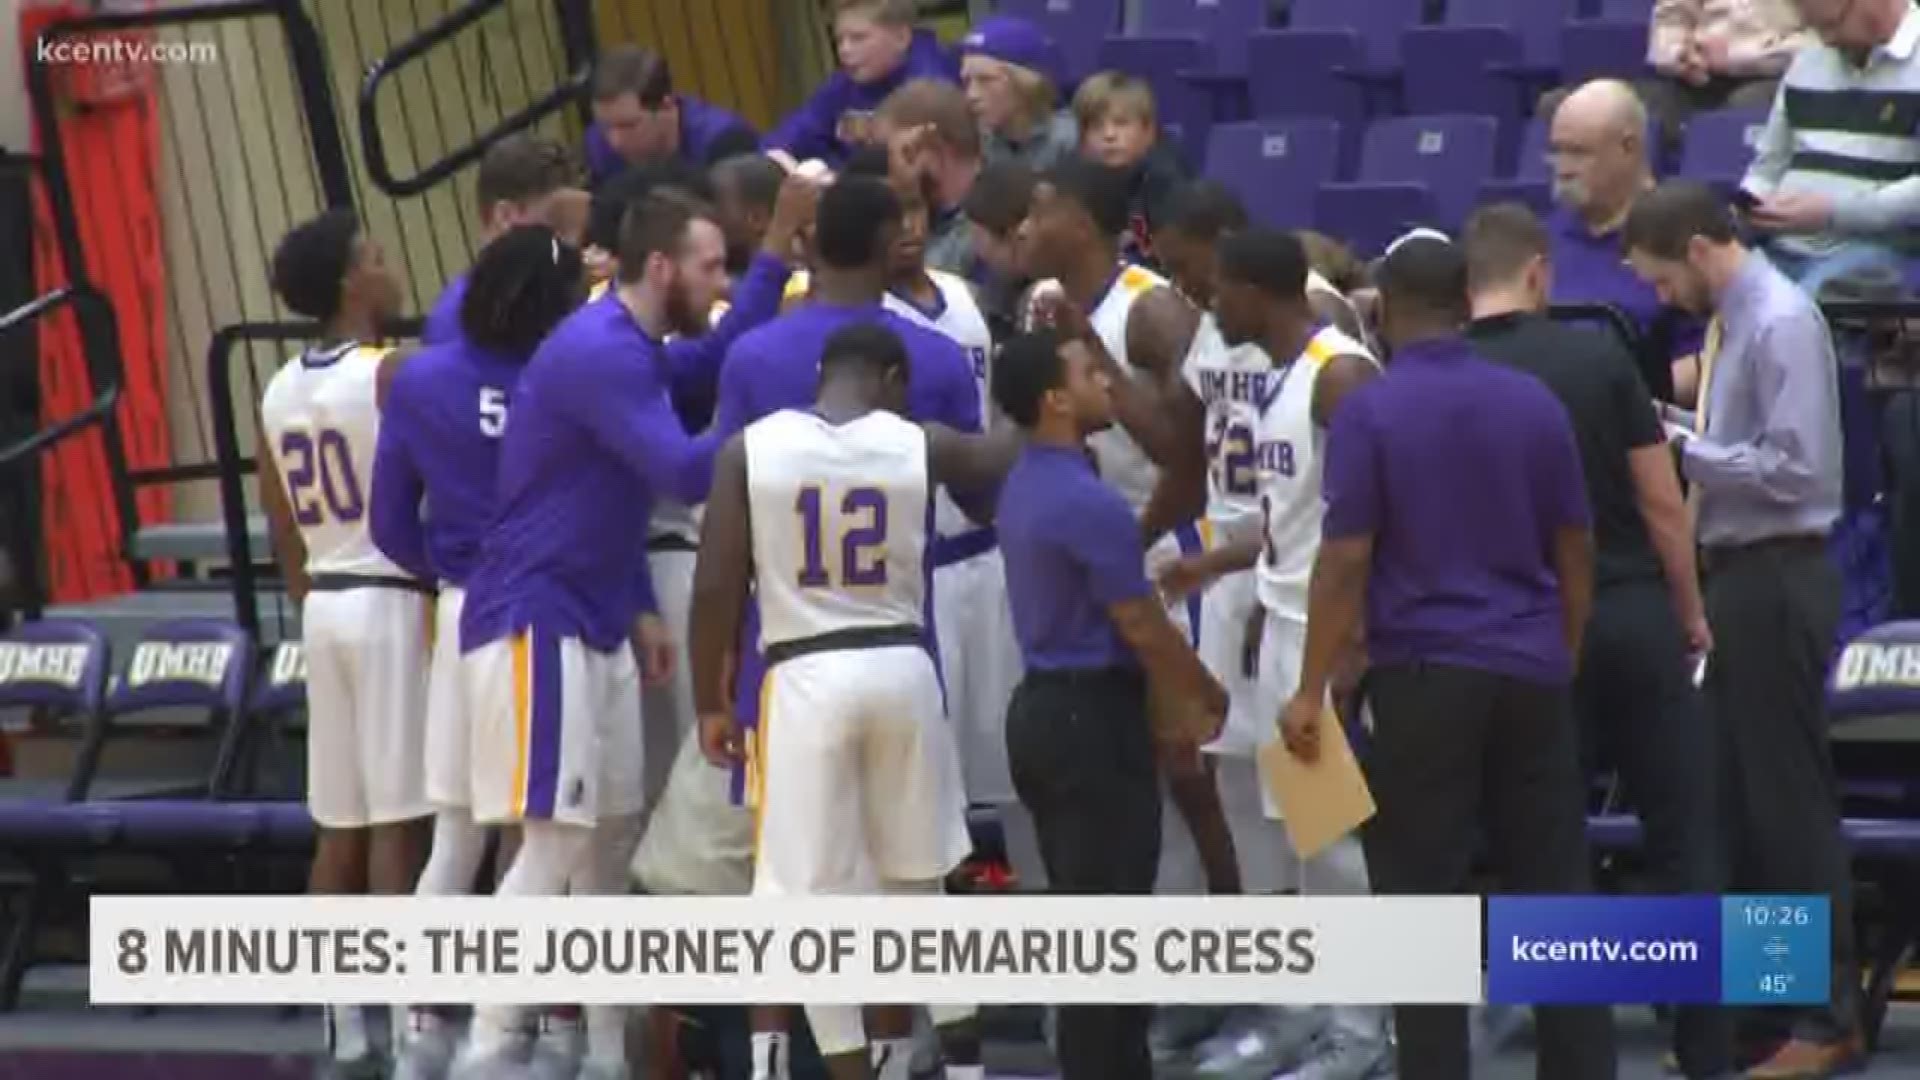 The UMHB Crusaders are in first place in the West Division of the American Southwest Conference. In large part, they can thank their record-setting point guard.